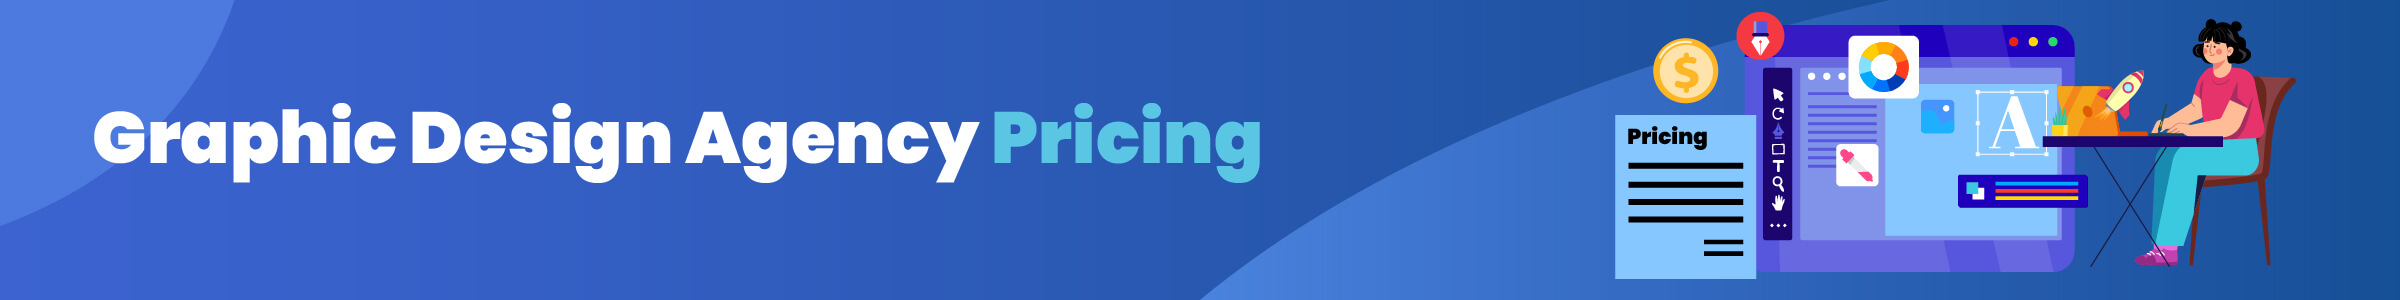 Graphic Design Agency Pricing